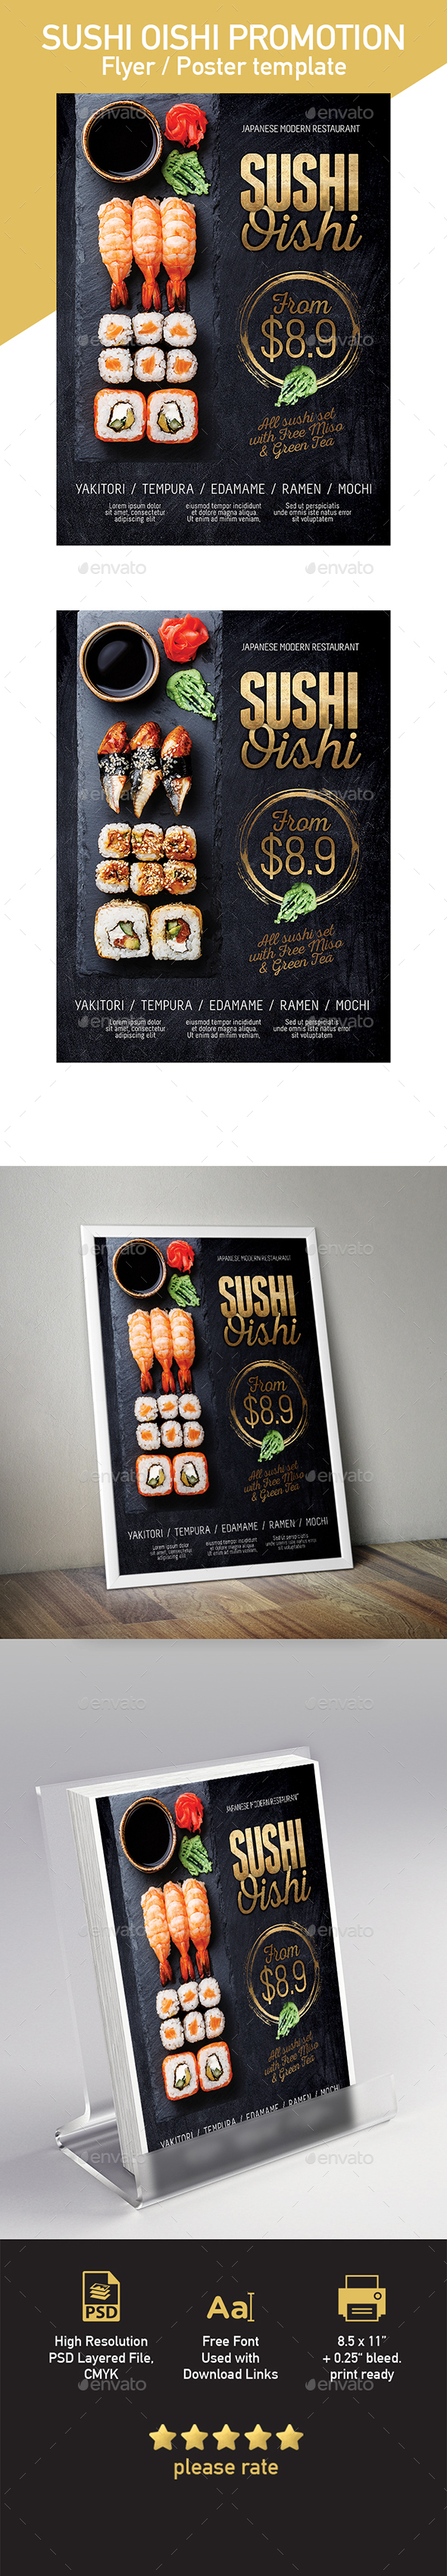 Japanese Sushi Flyer / Poster Template